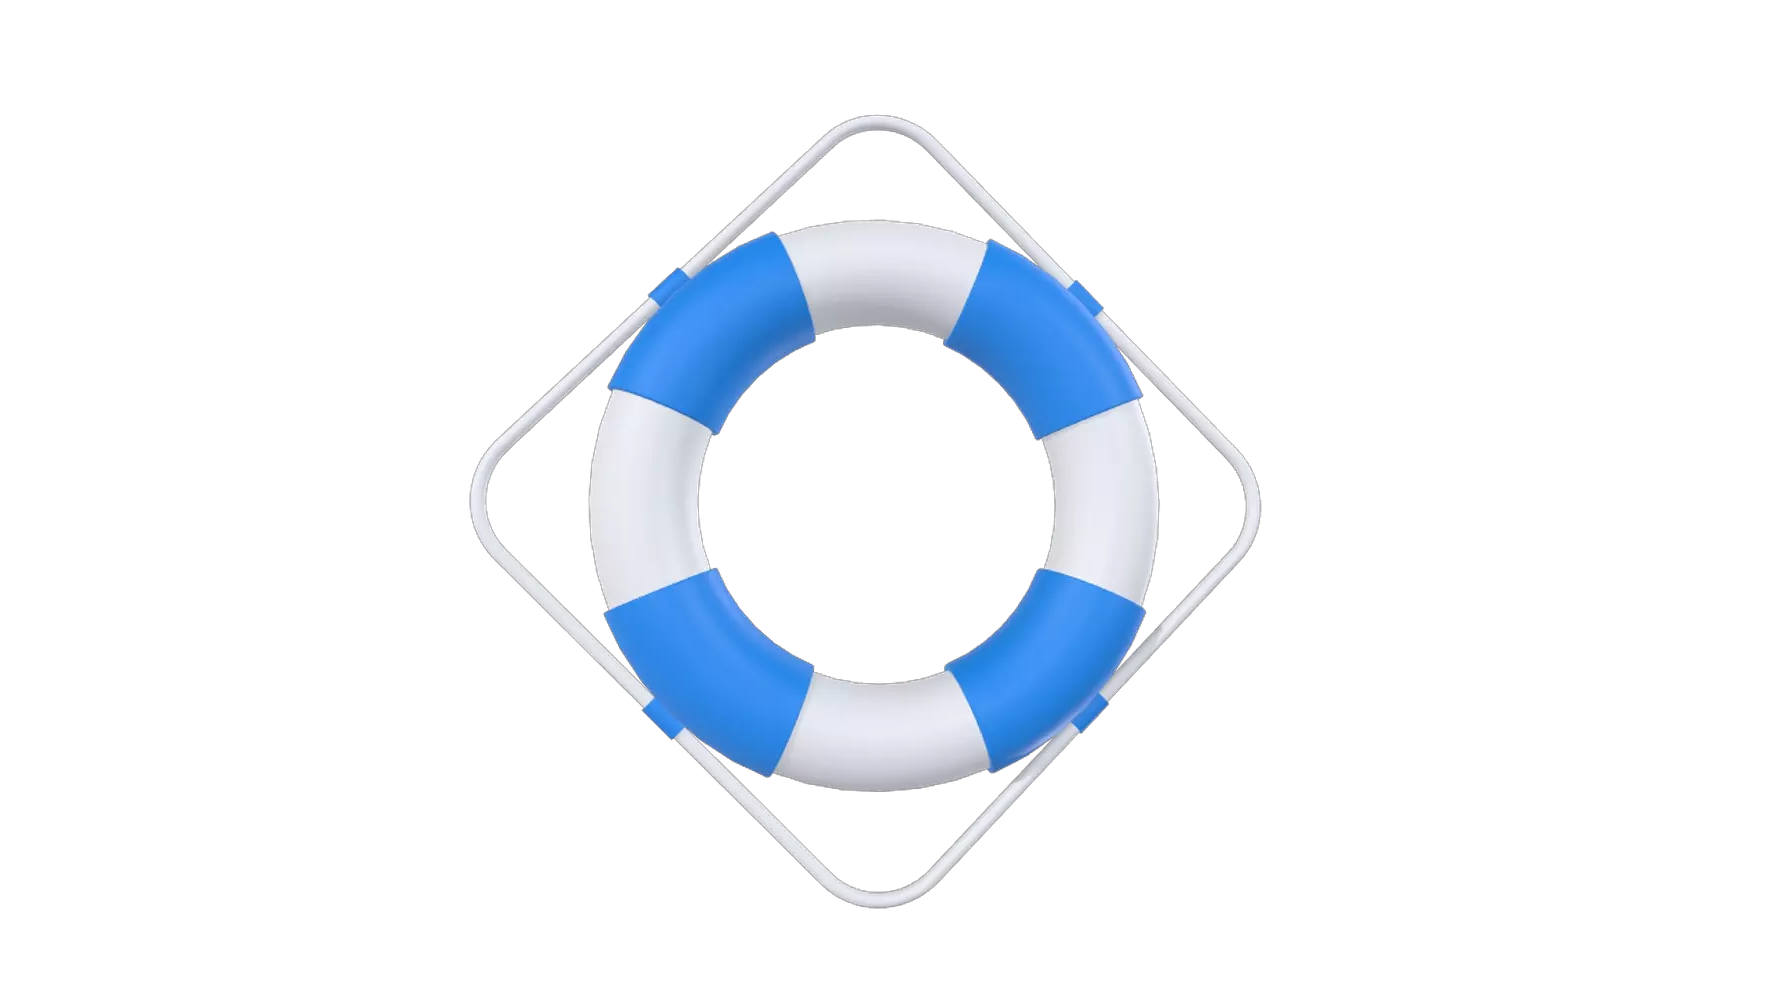 Life Buoy 3D Graphic